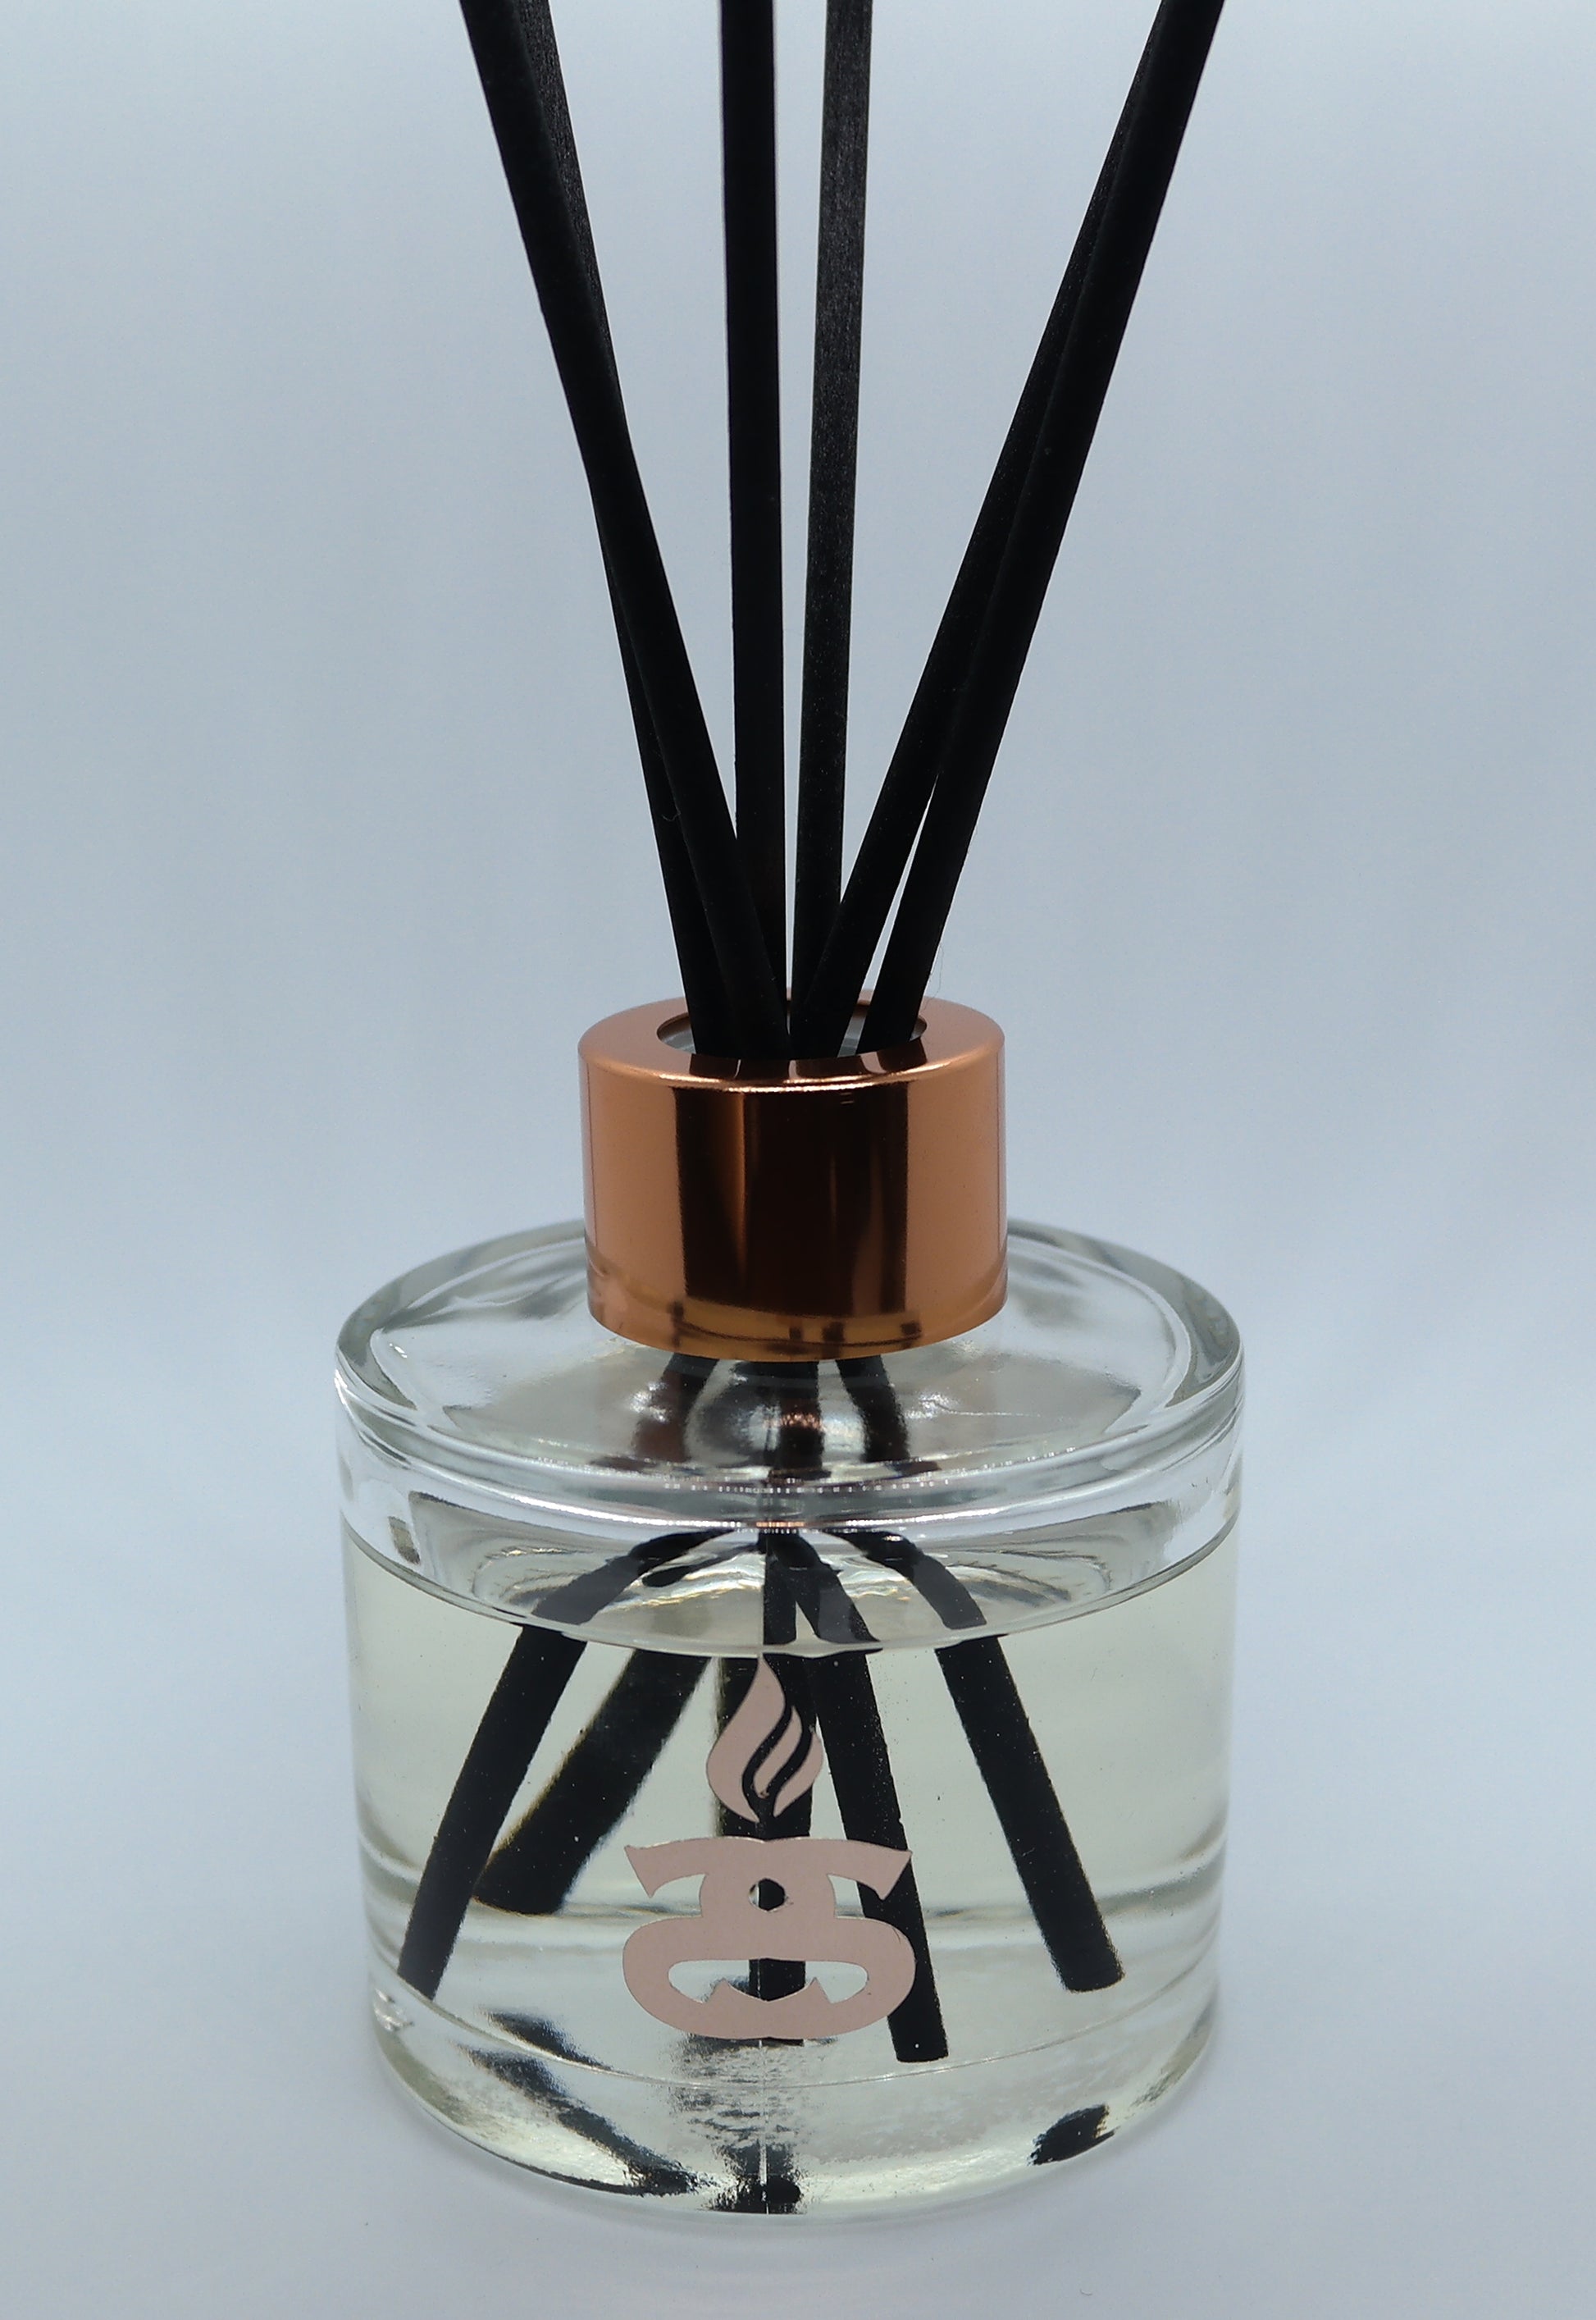 Simple Scents Excellence Reed Diffuser in 100ml glass squat bottle with rose gold cap lid and black fibre reeds inside bottle neck